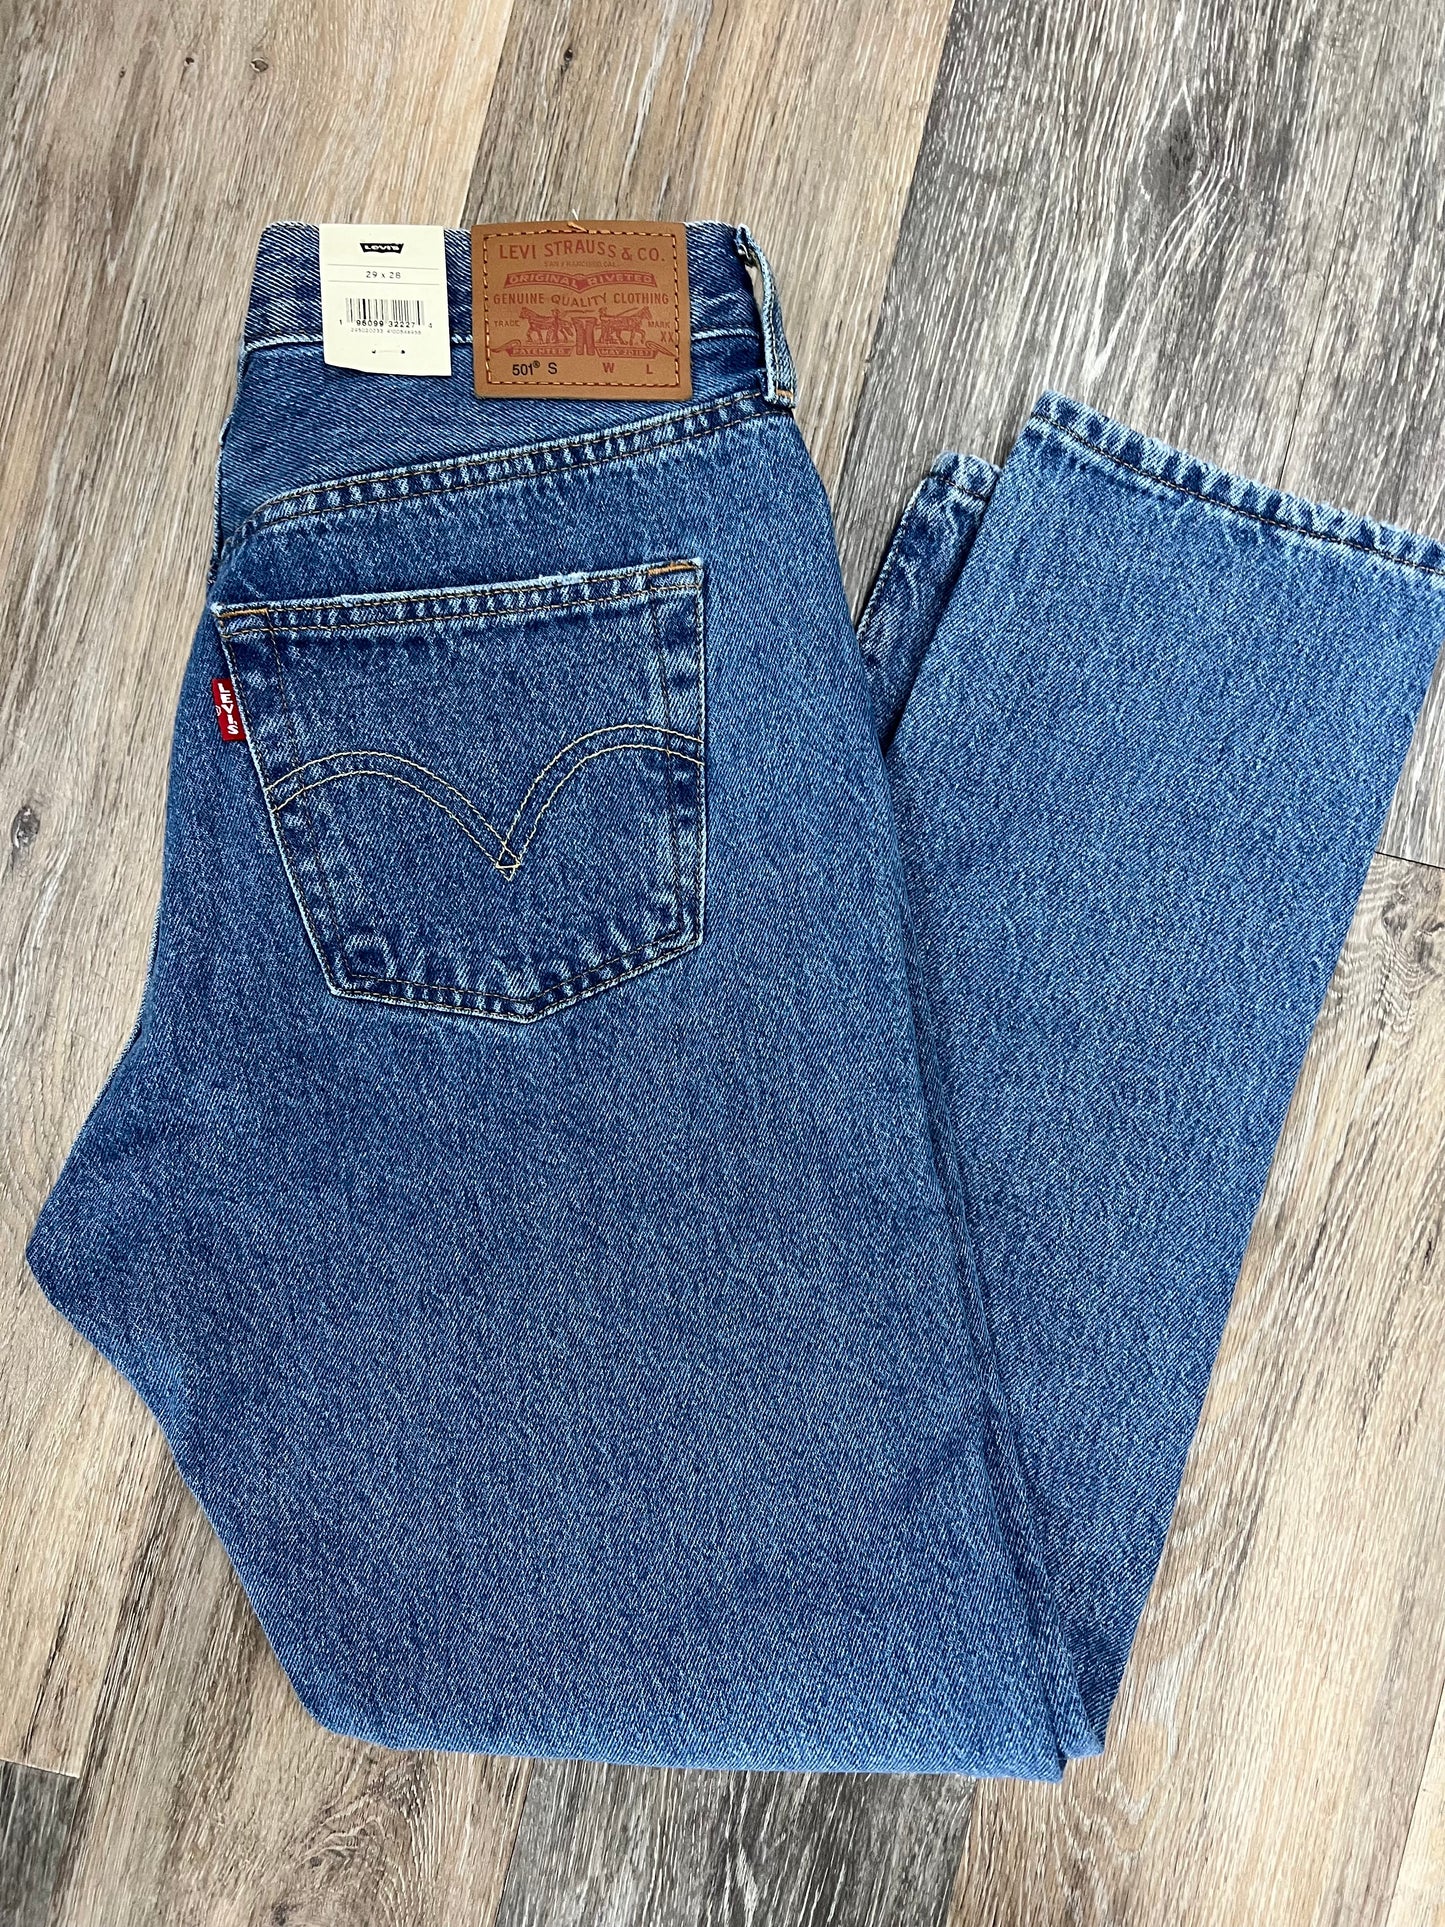 Jeans Skinny By Levis  Size: 8/29